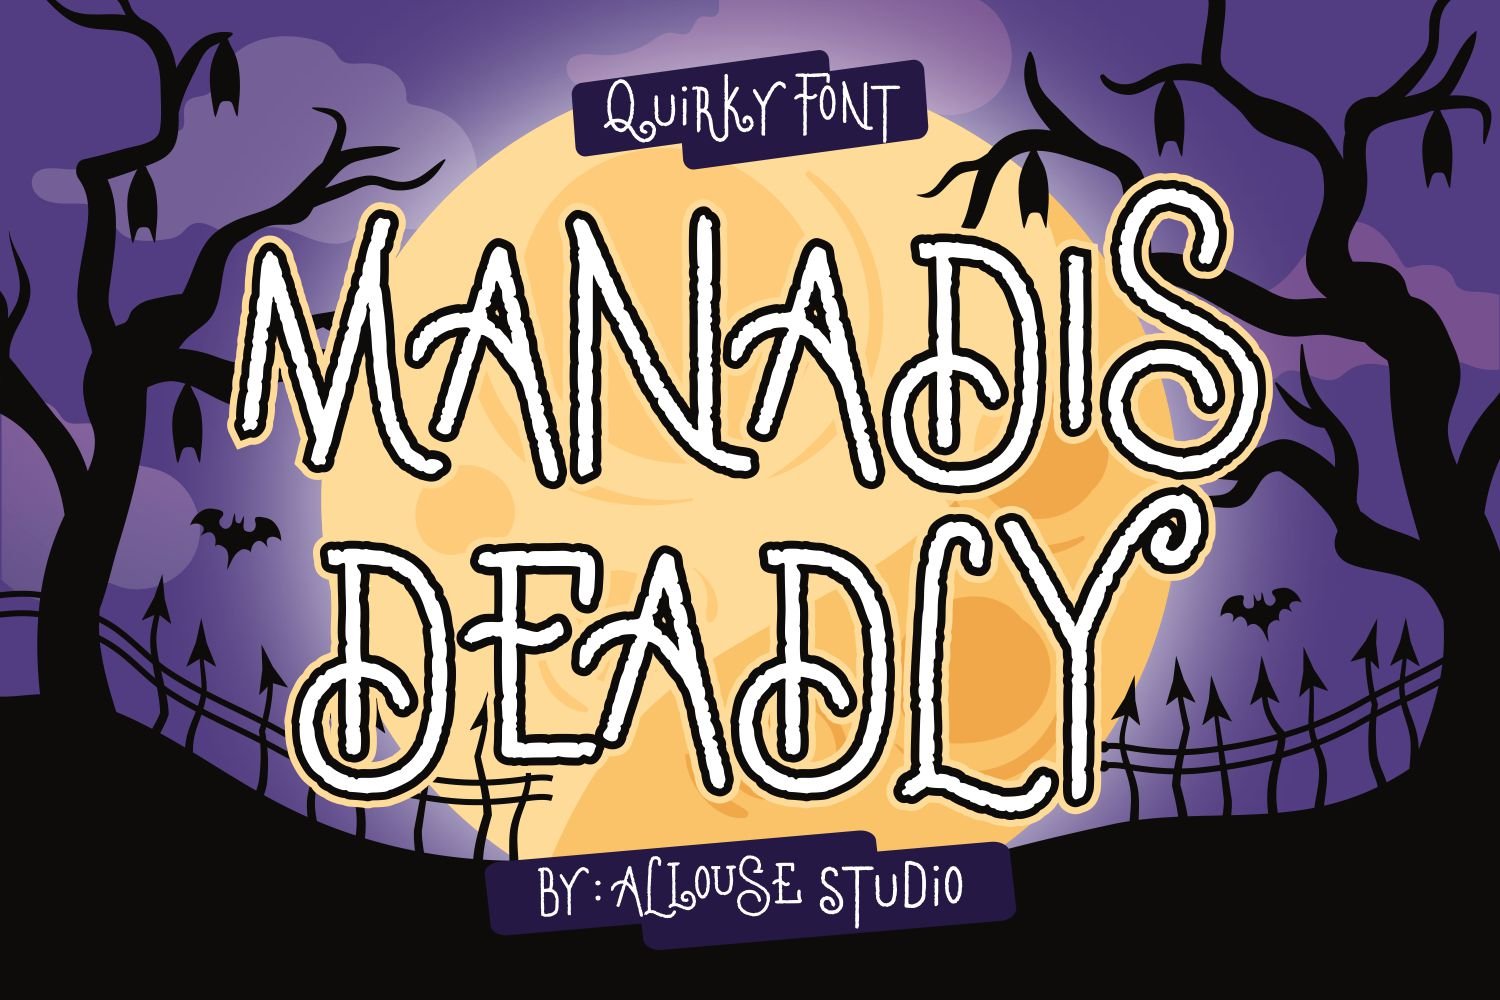 Manadis Deadly Font cover image.